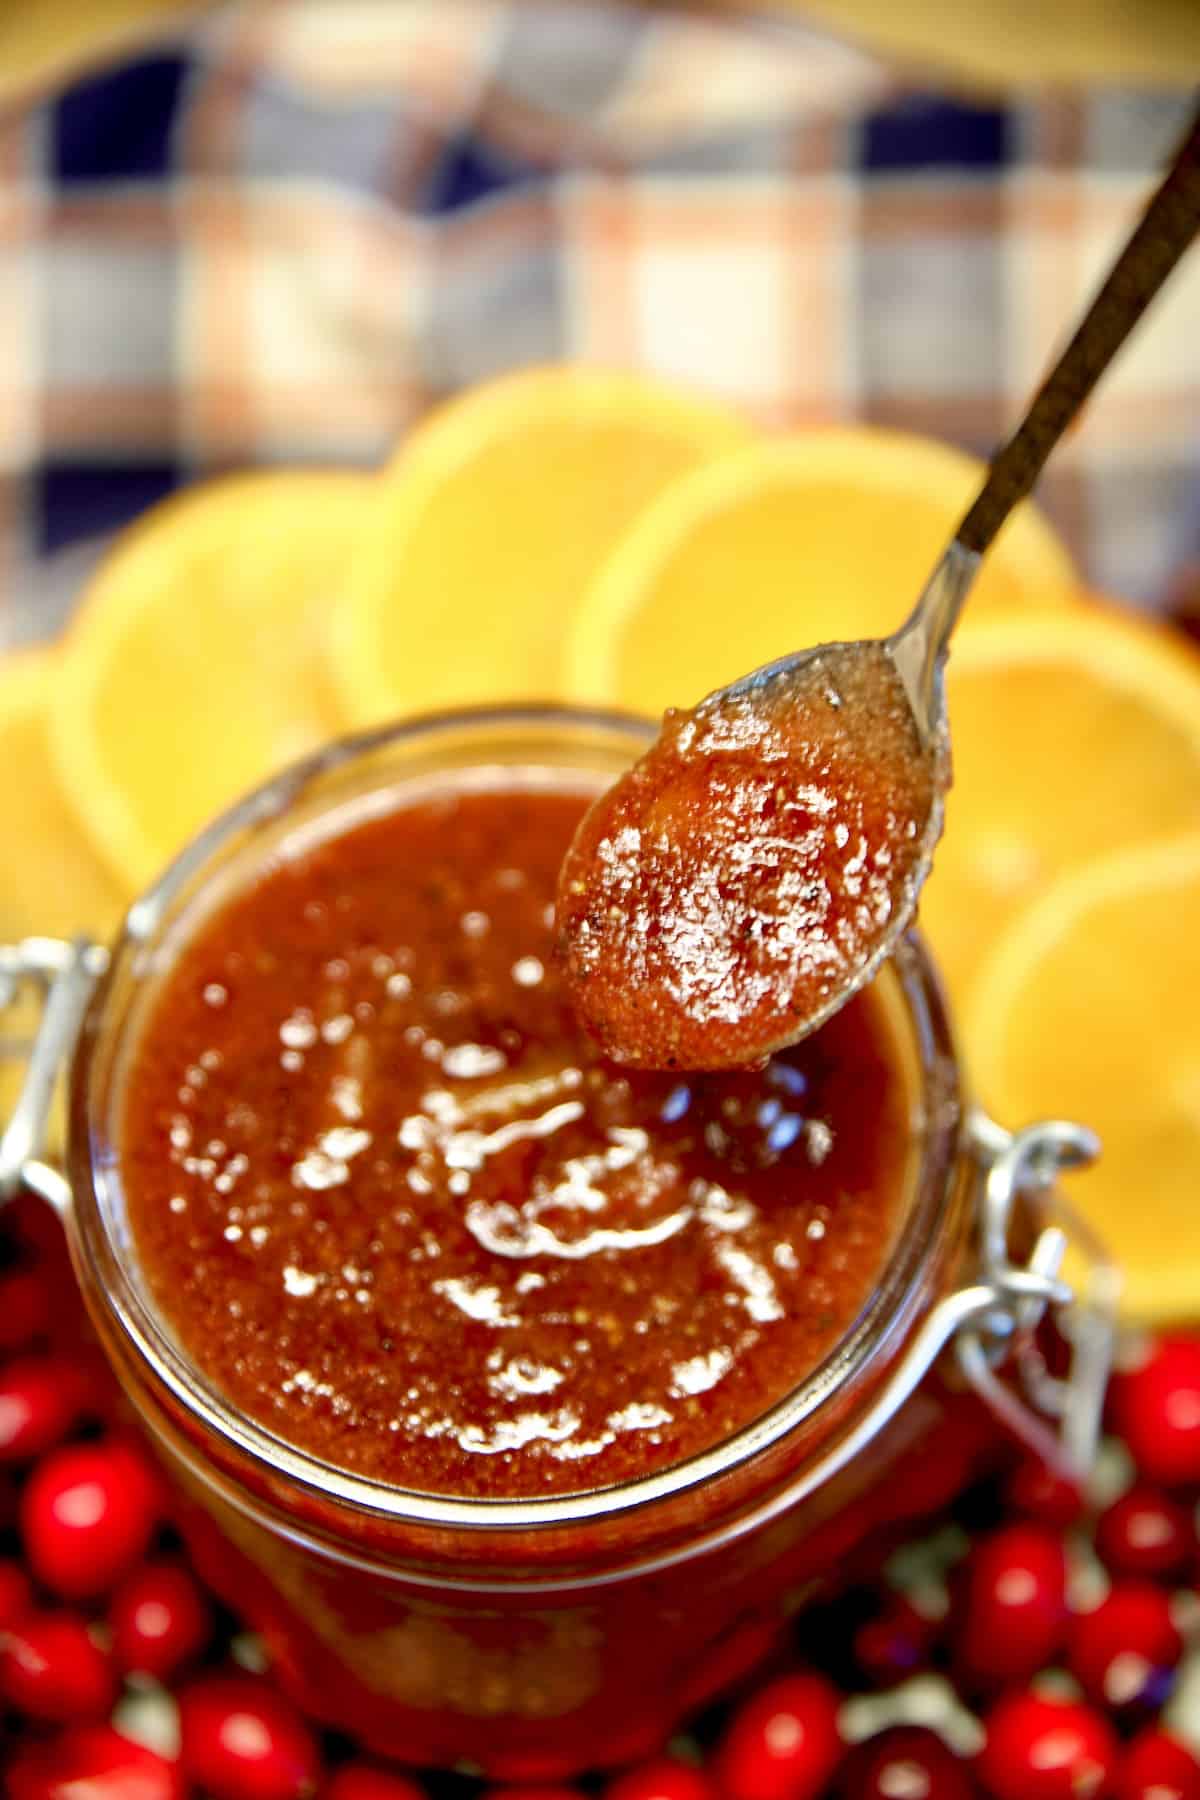 Spoon dipping orange cranberry sauce from a jar.